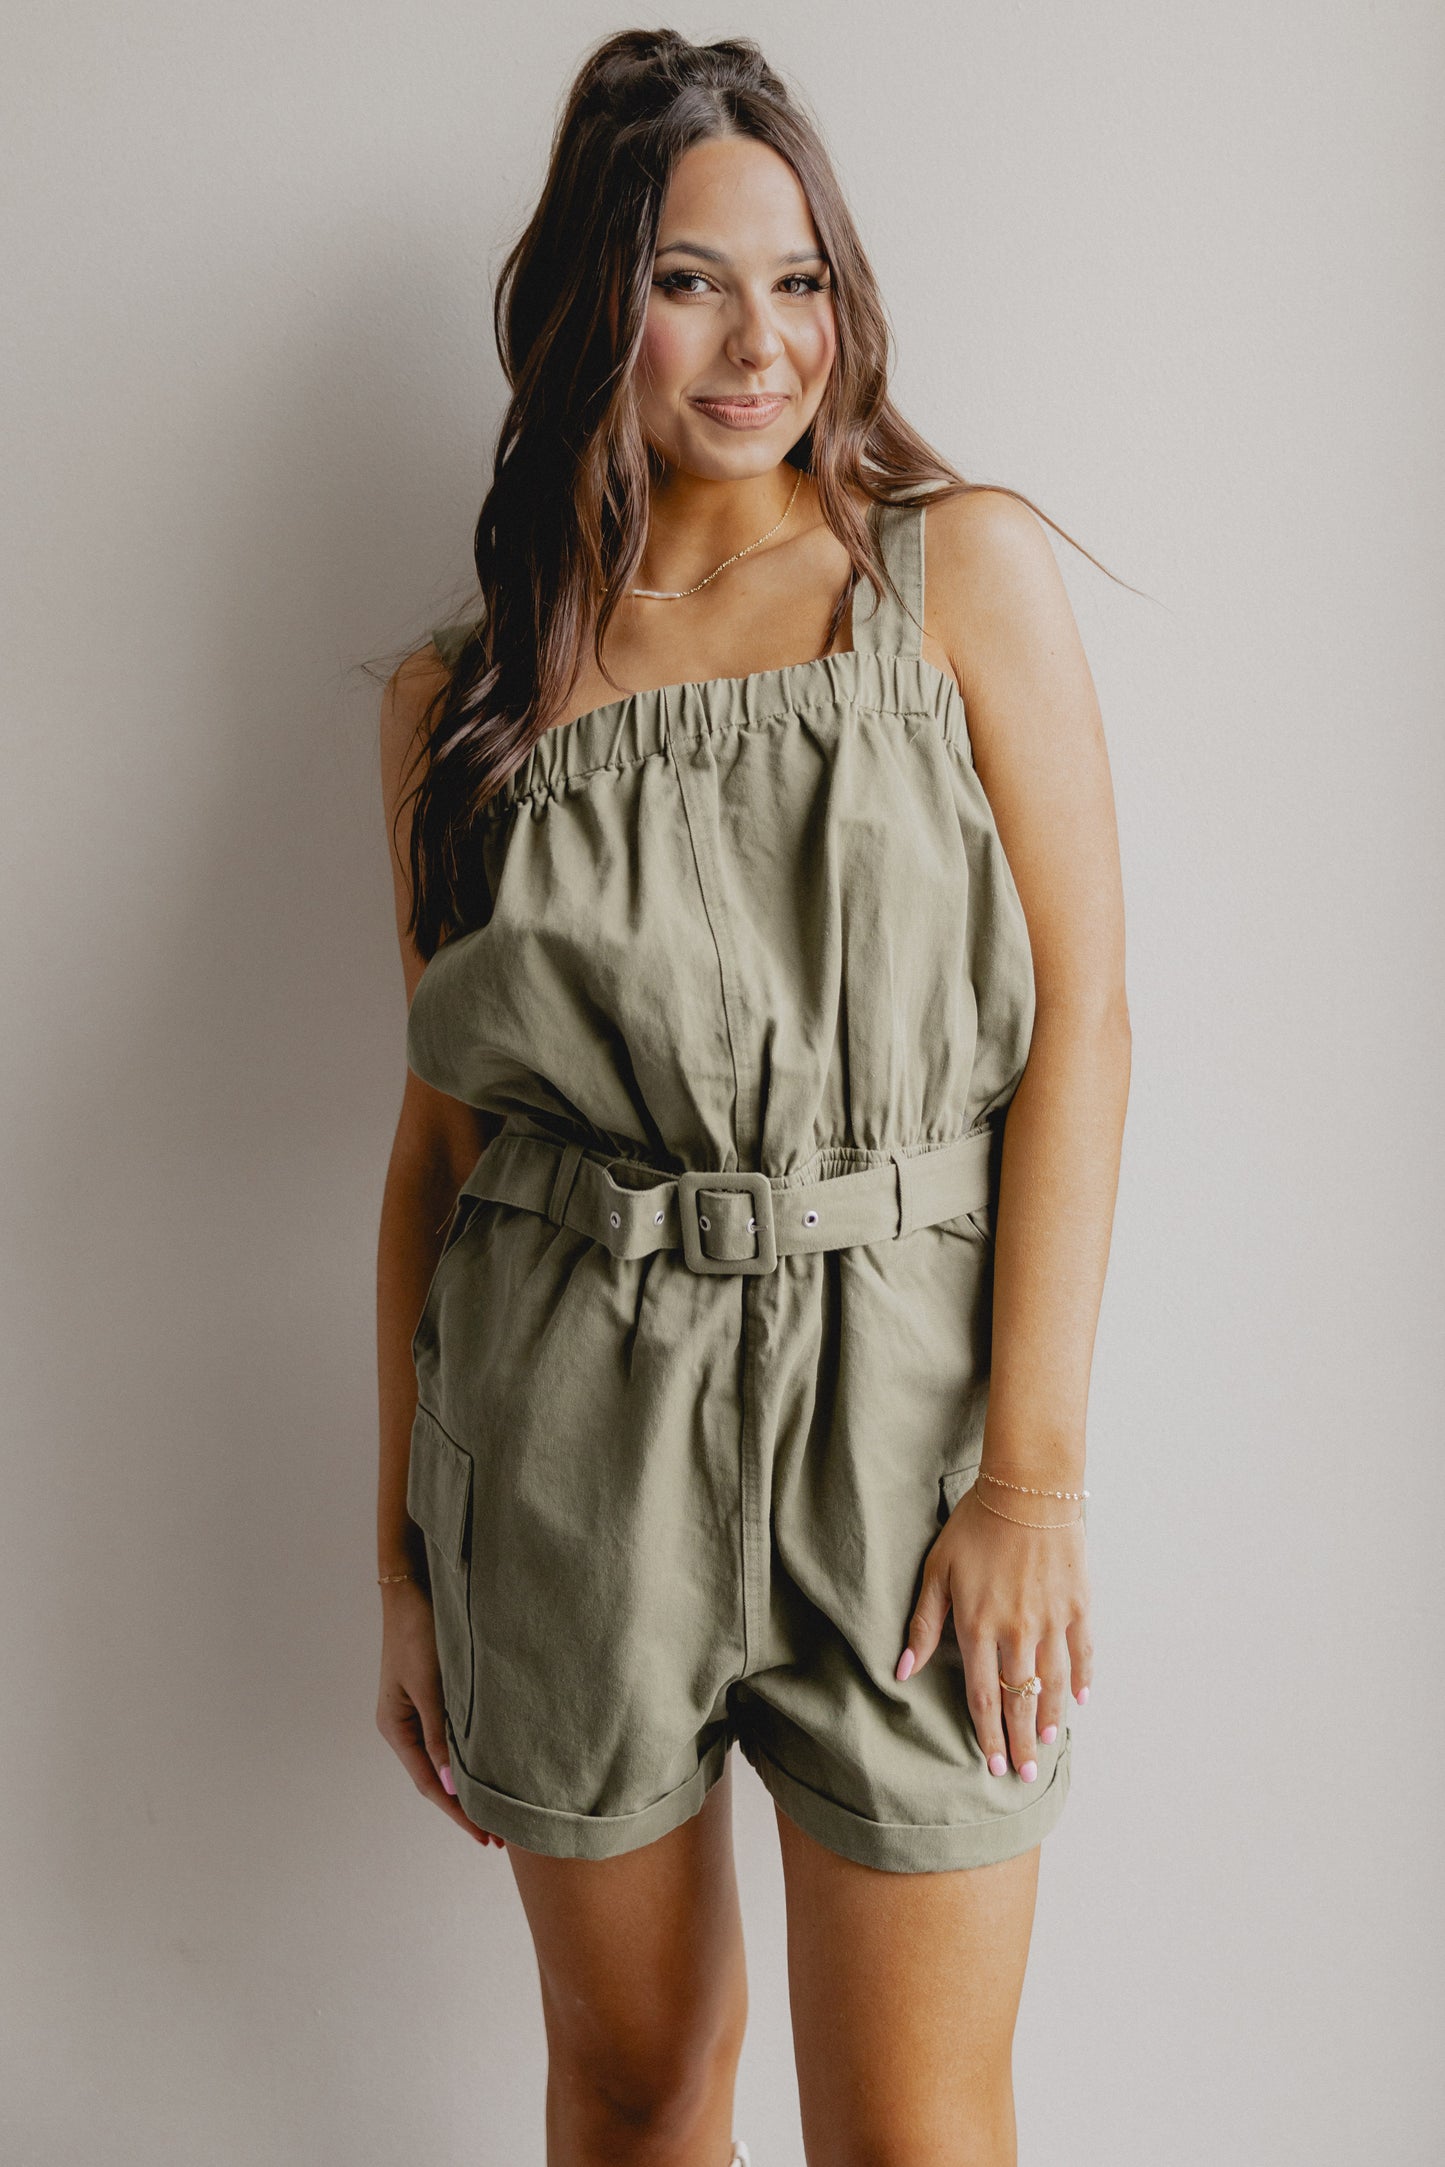 Outlaws Belted Romper Olive *Online Exclusive*